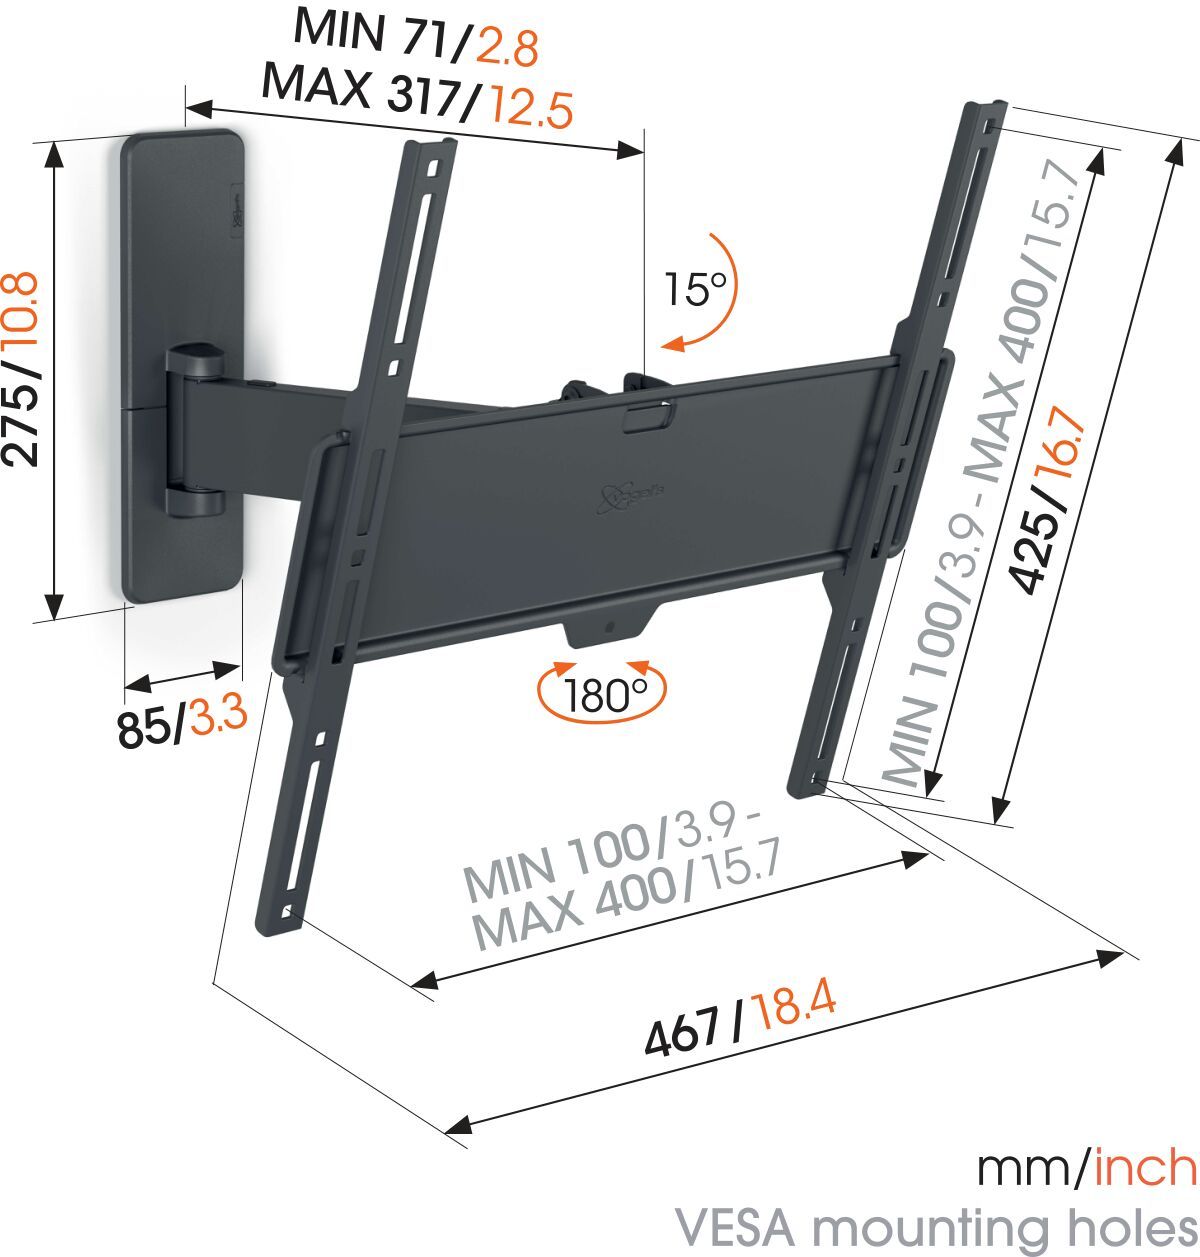 Vogel's TVM 1423 Full-Motion TV Wall Mount - Suitable for 32 up to 65 inch TVs - Motion (up to 120°) swivel - Tilt up to 15° - Dimensions